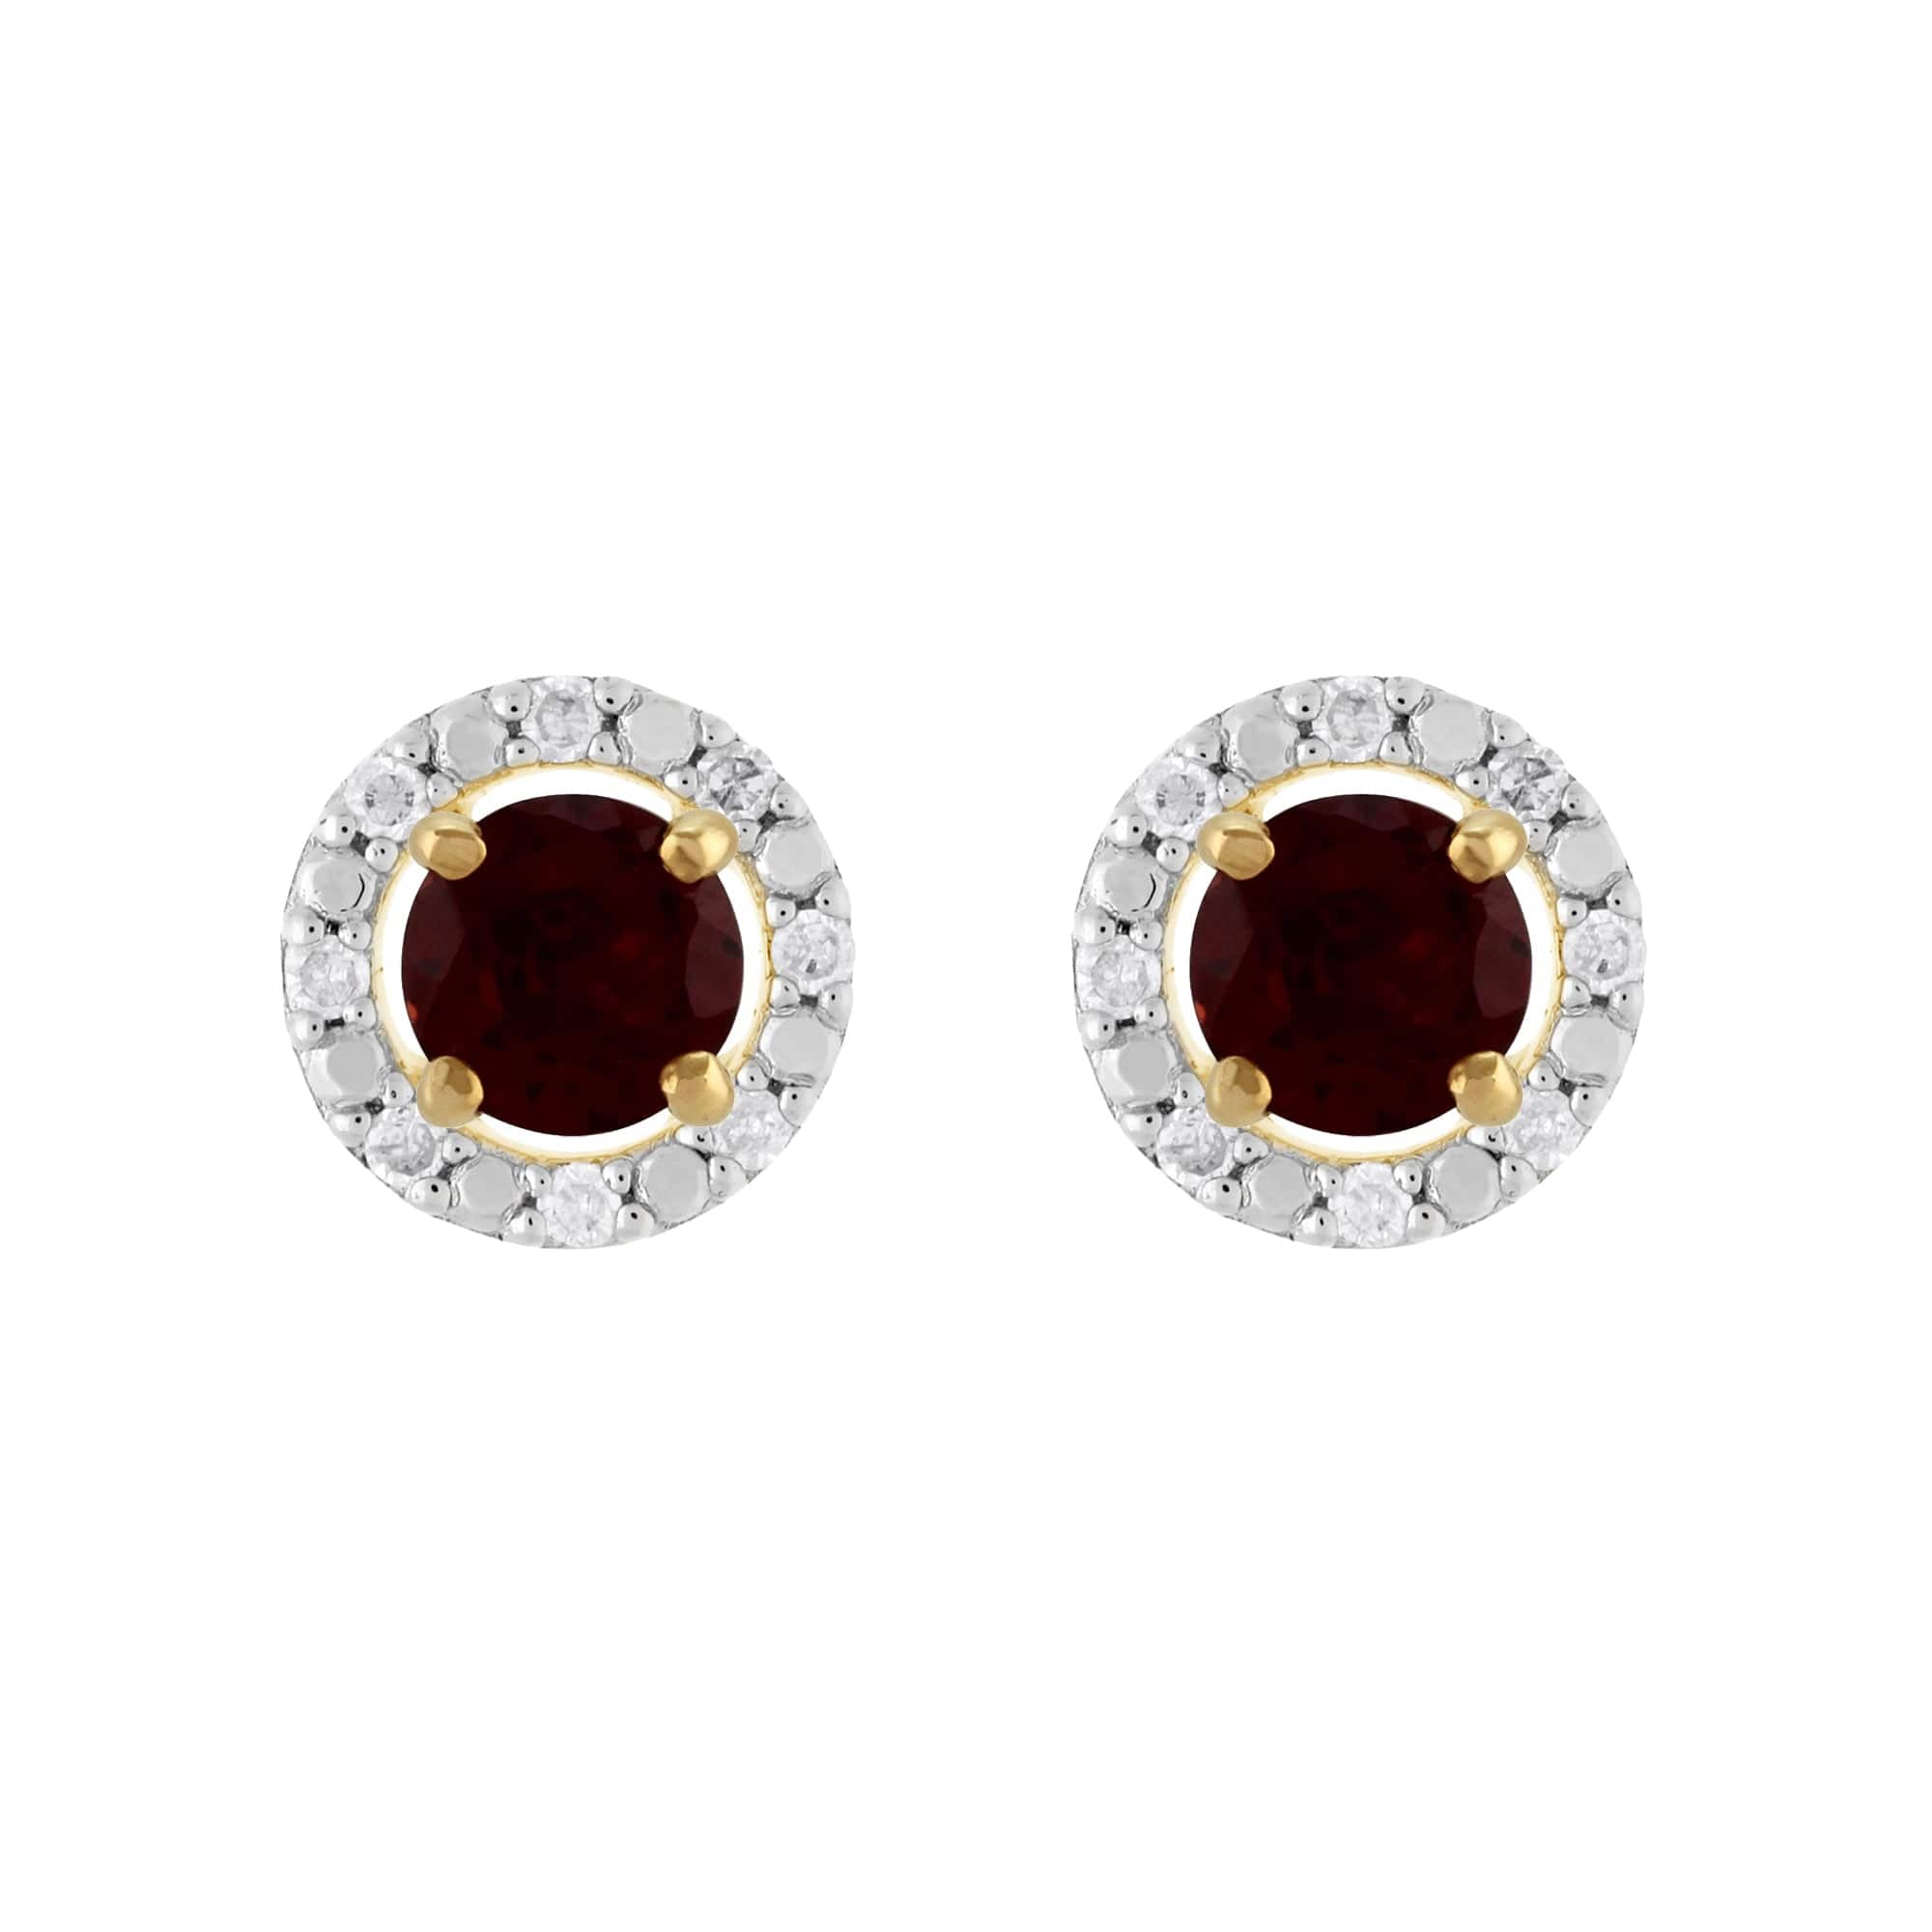 11568-191E0376019 Classic Round Garnet Stud Earrings with Detachable Diamond Round Earrings Jacket Set in 9ct Yellow Gold 1